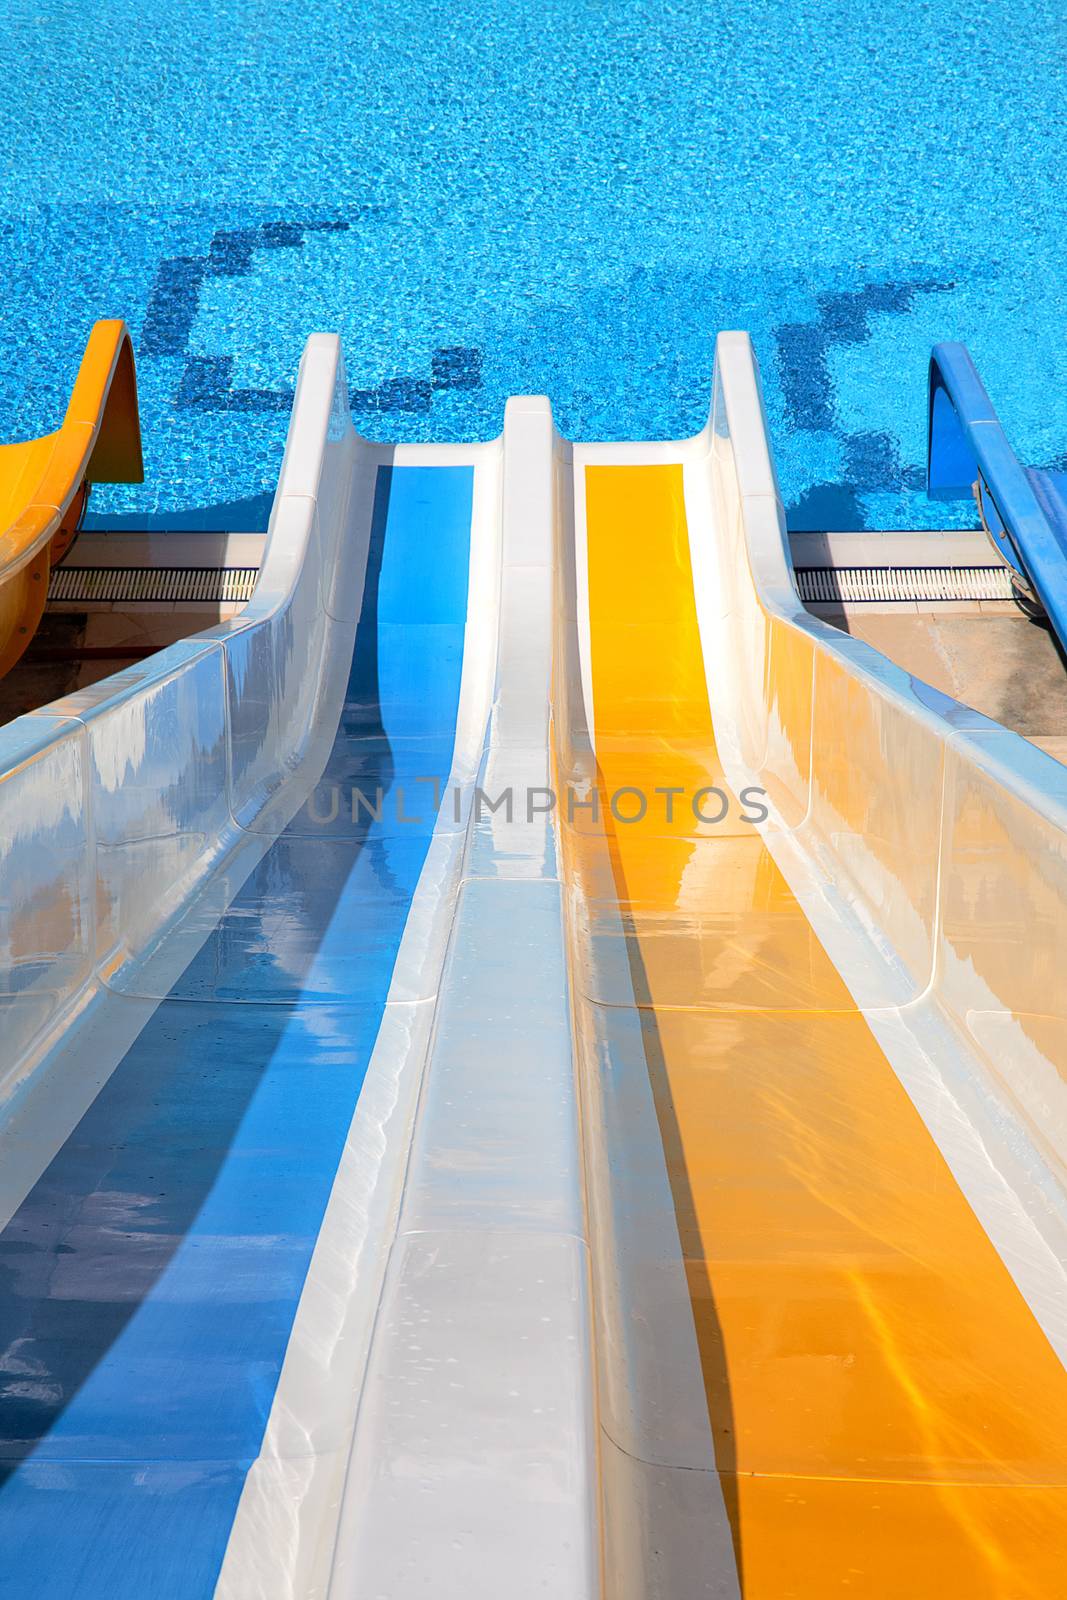 top point of view of water slide with pool